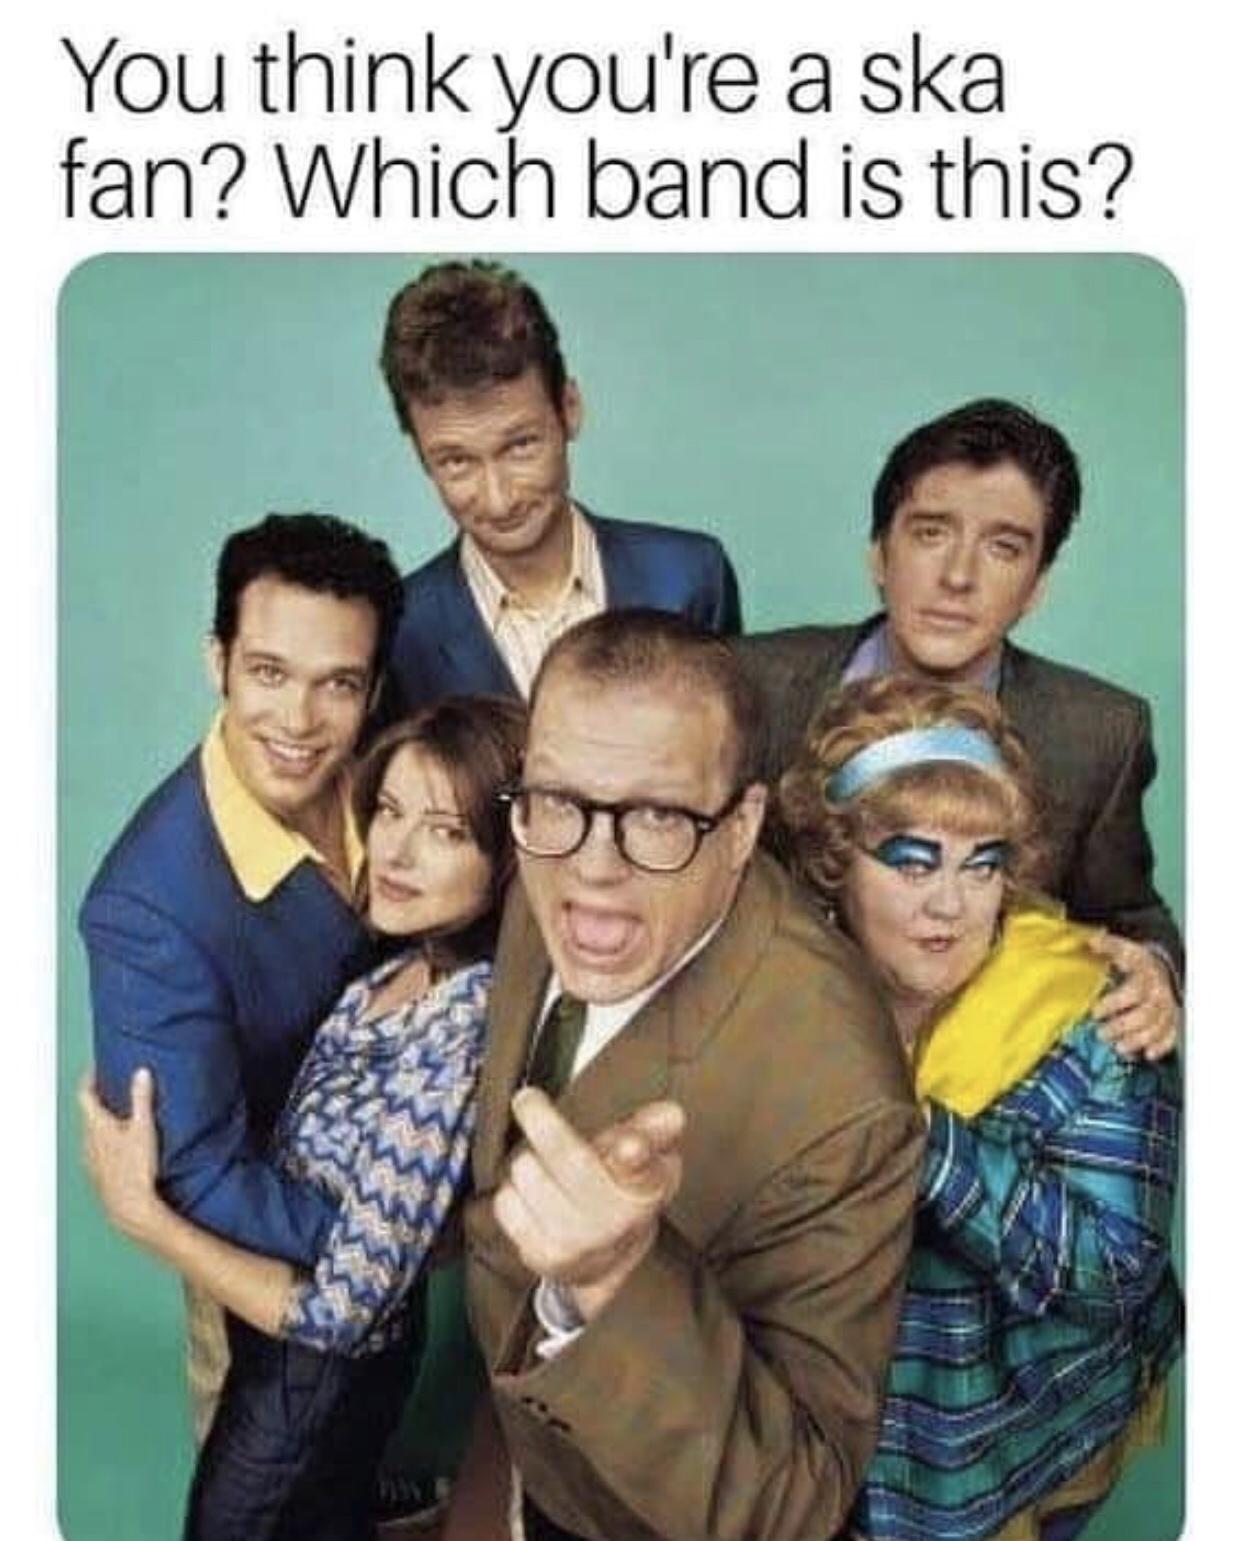 rewind tv - You think you're a ska fan? Which band is this? be